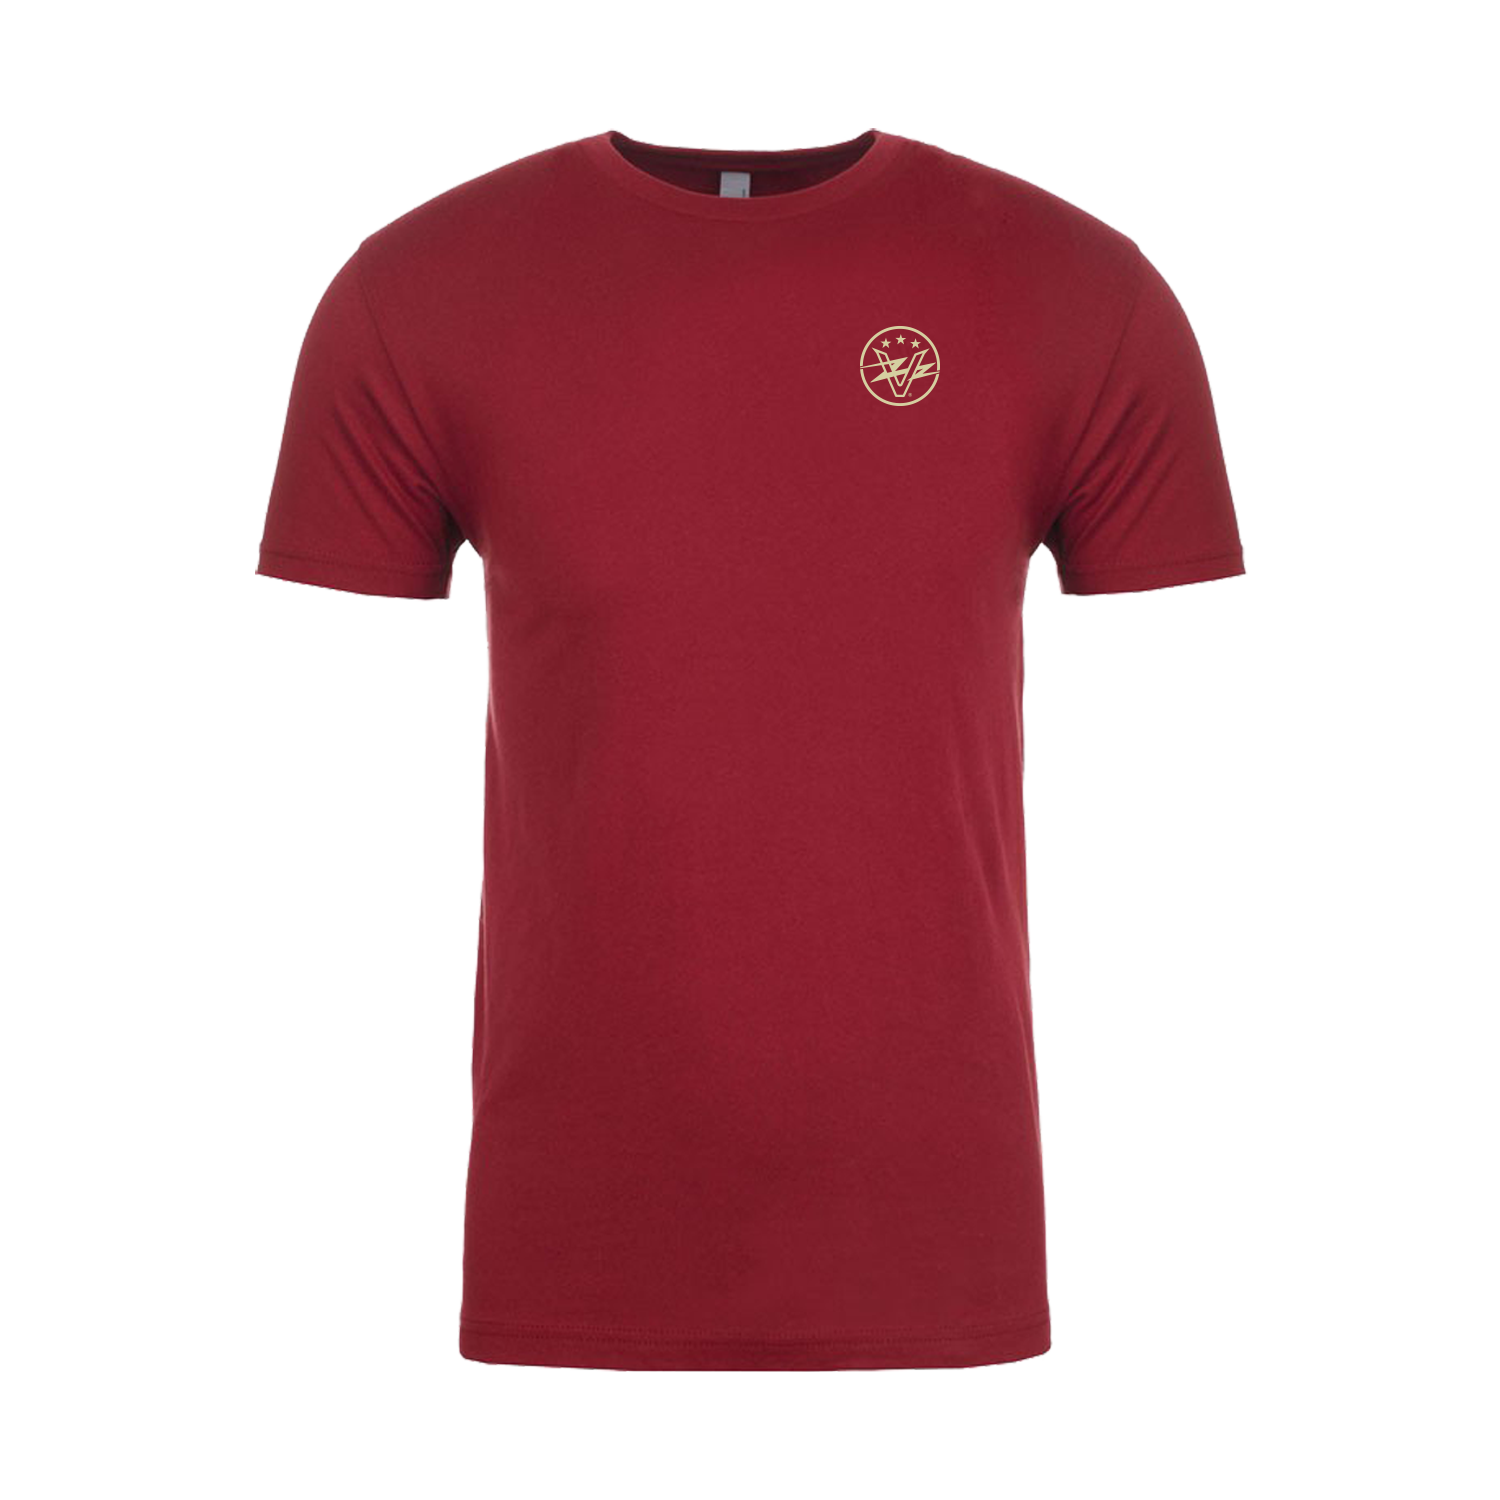 Quality Cycles Red Tee | Vintage Electric Bikes